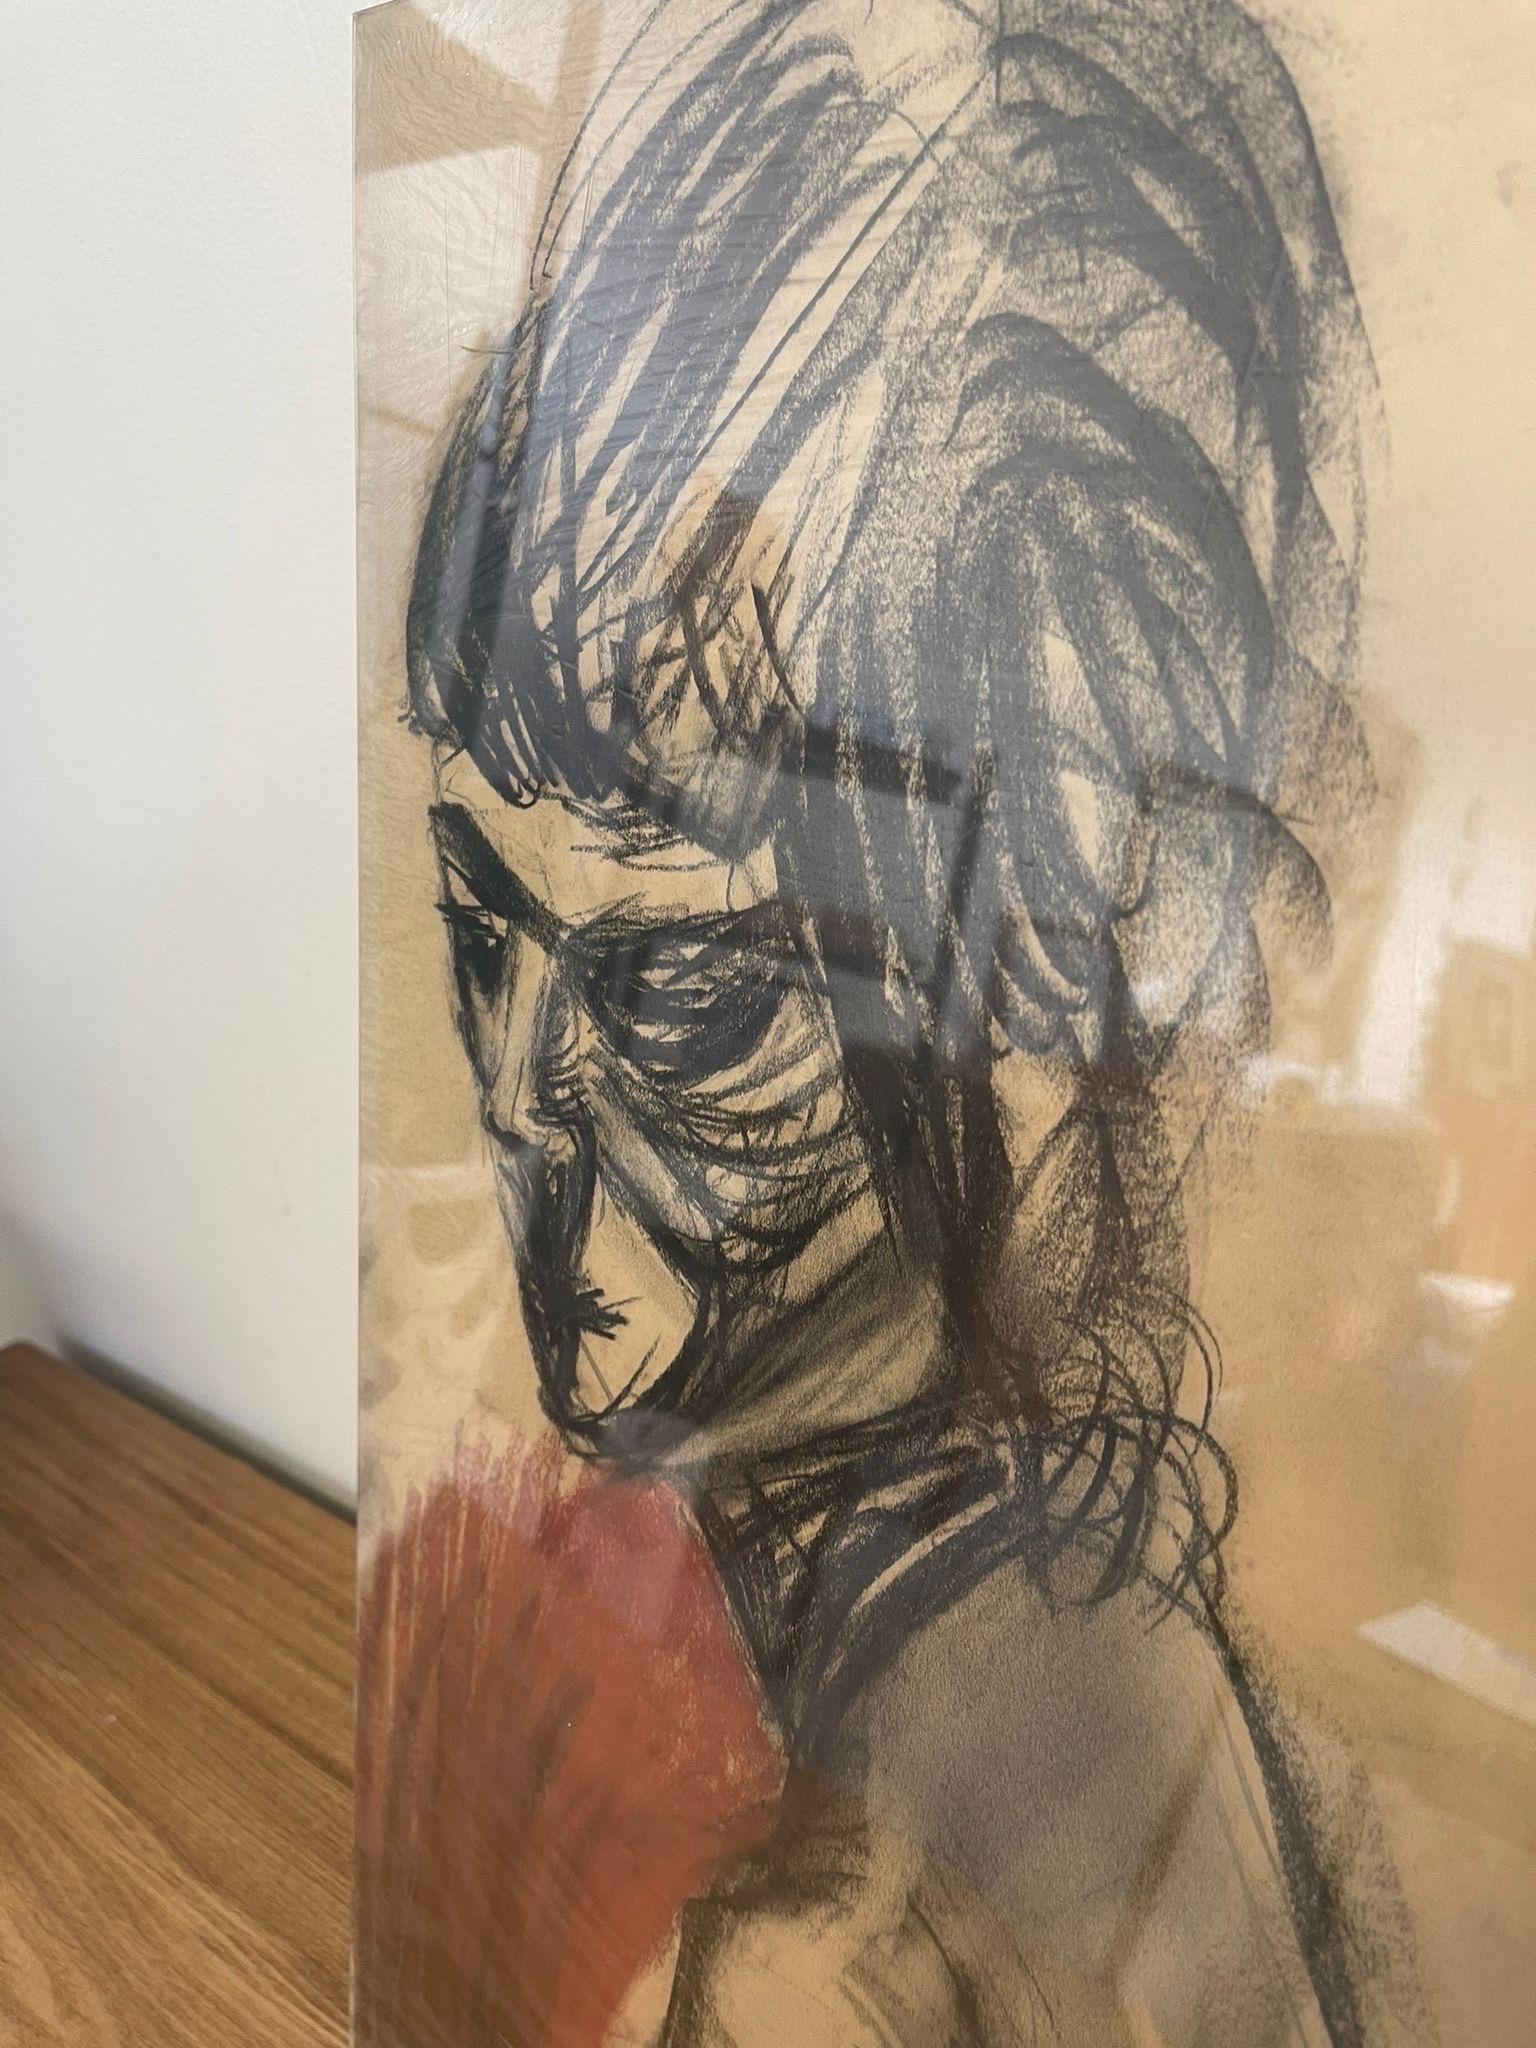 Vintage Abstract Figure Drawing on Paper with Plastic Covering Possibly Charcoal or Pastel

Dimensions. 16 L ; 1/4 P ; 20 H